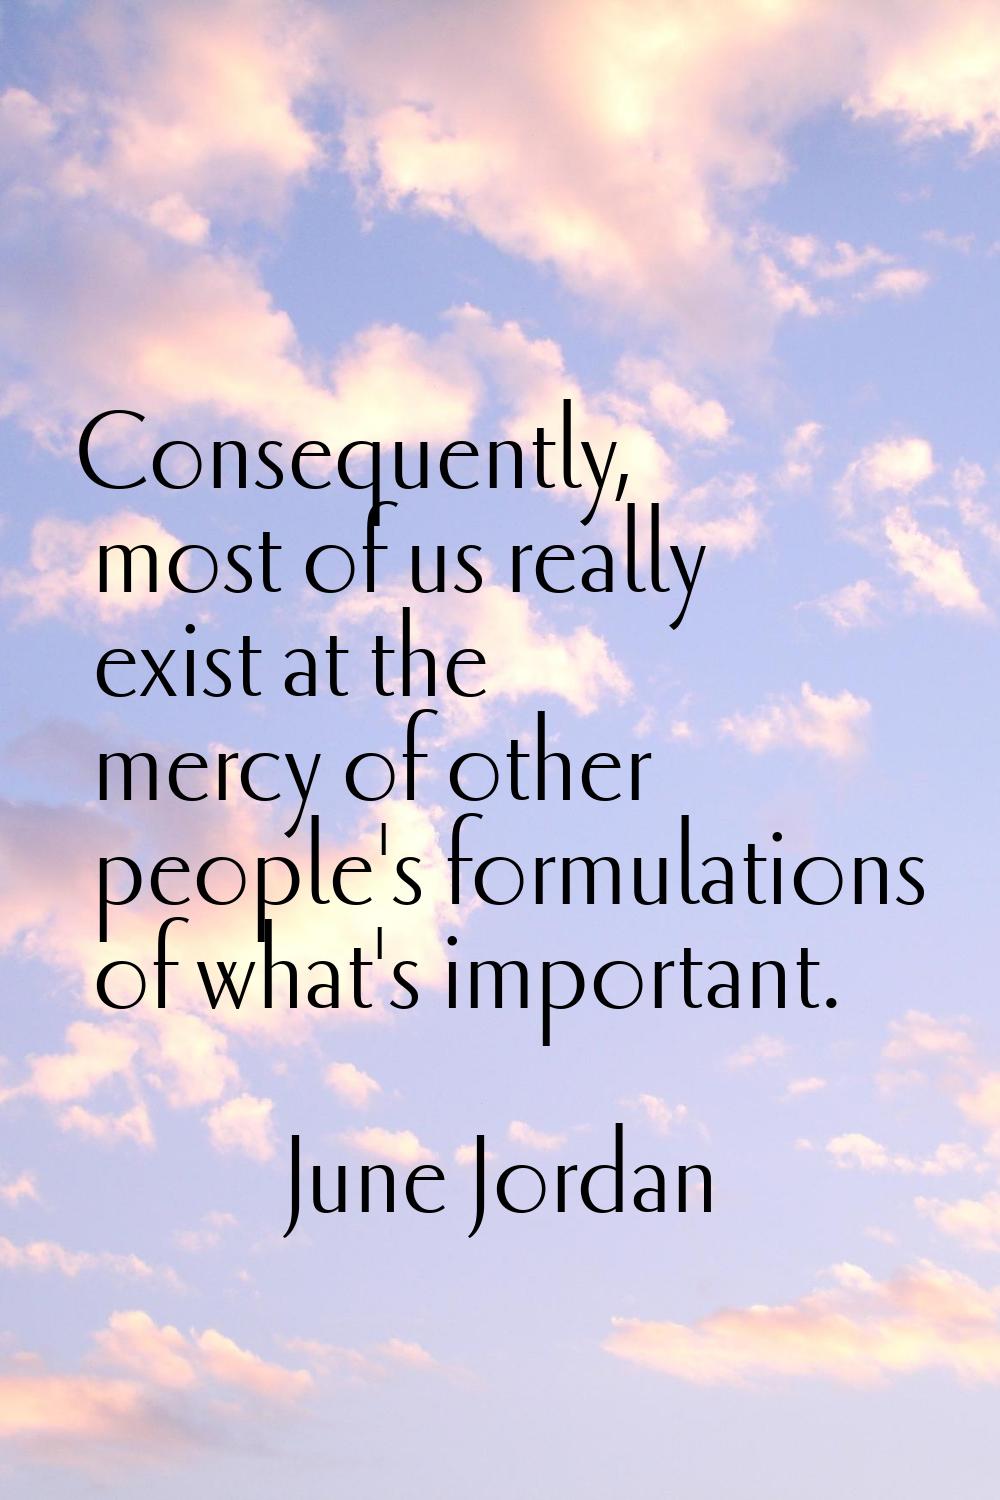 Consequently, most of us really exist at the mercy of other people's formulations of what's importa